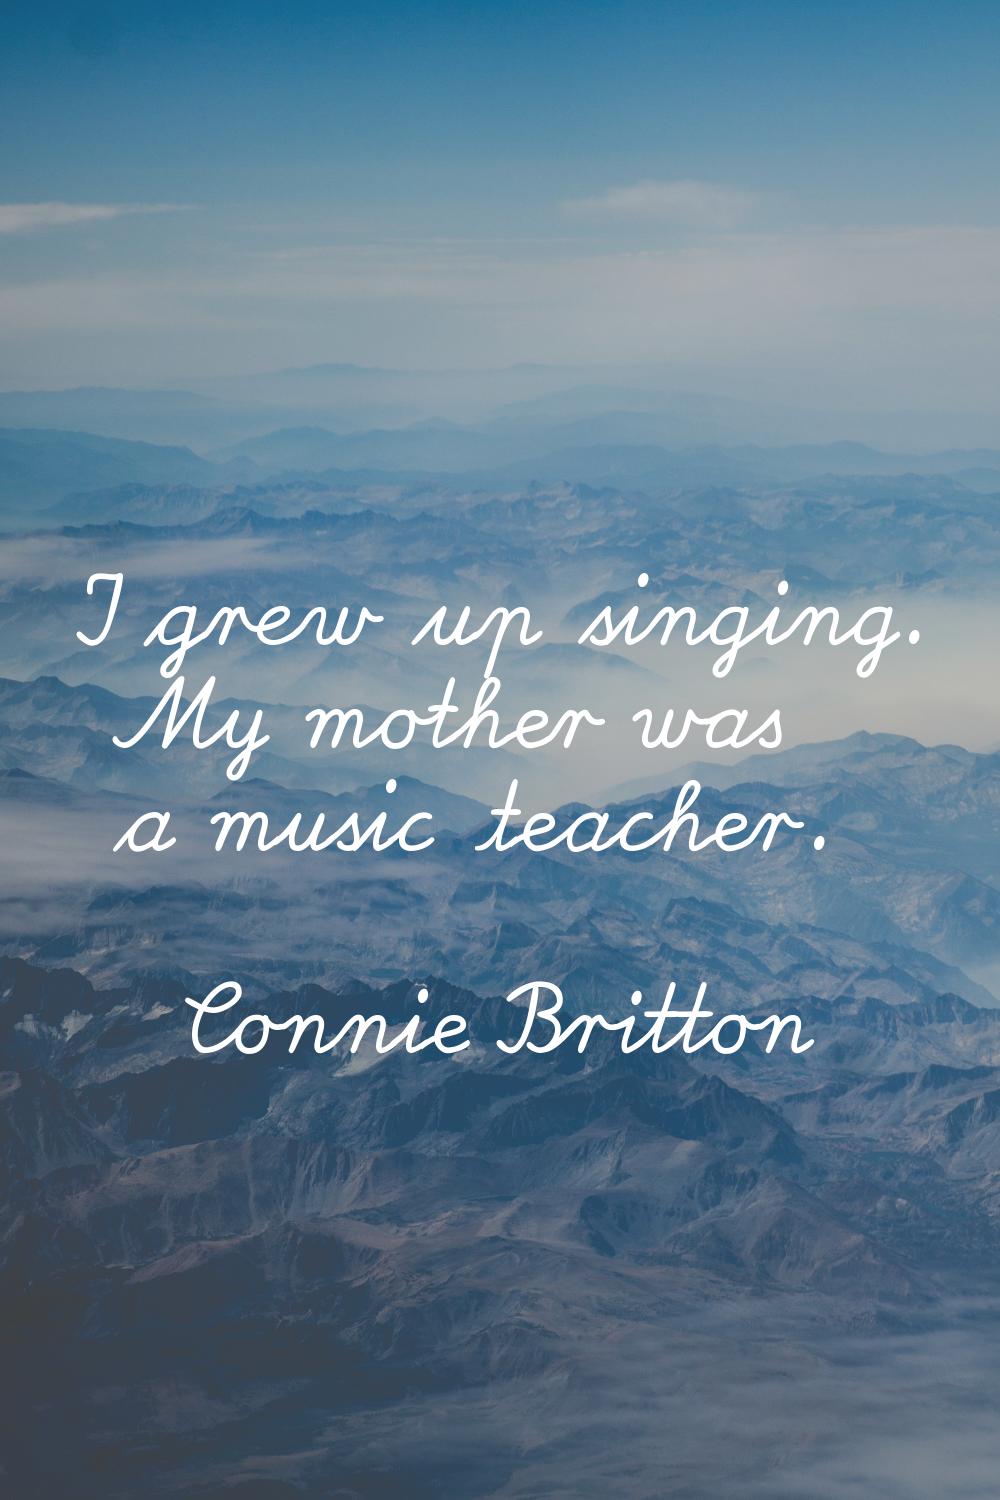 I grew up singing. My mother was a music teacher.